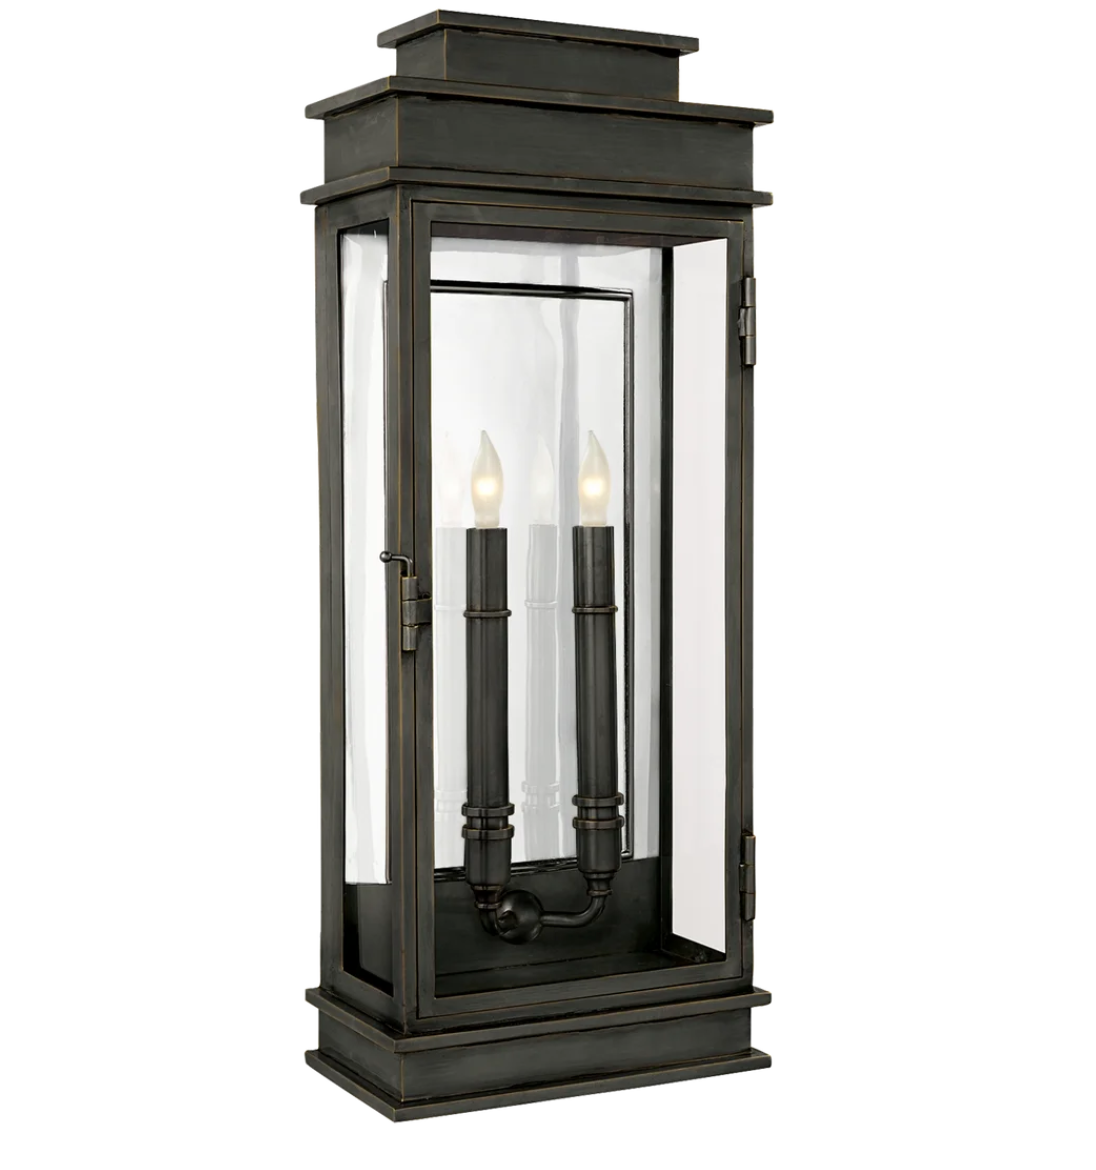 Create Ambiance Outdoors with Linear Lantern Tall